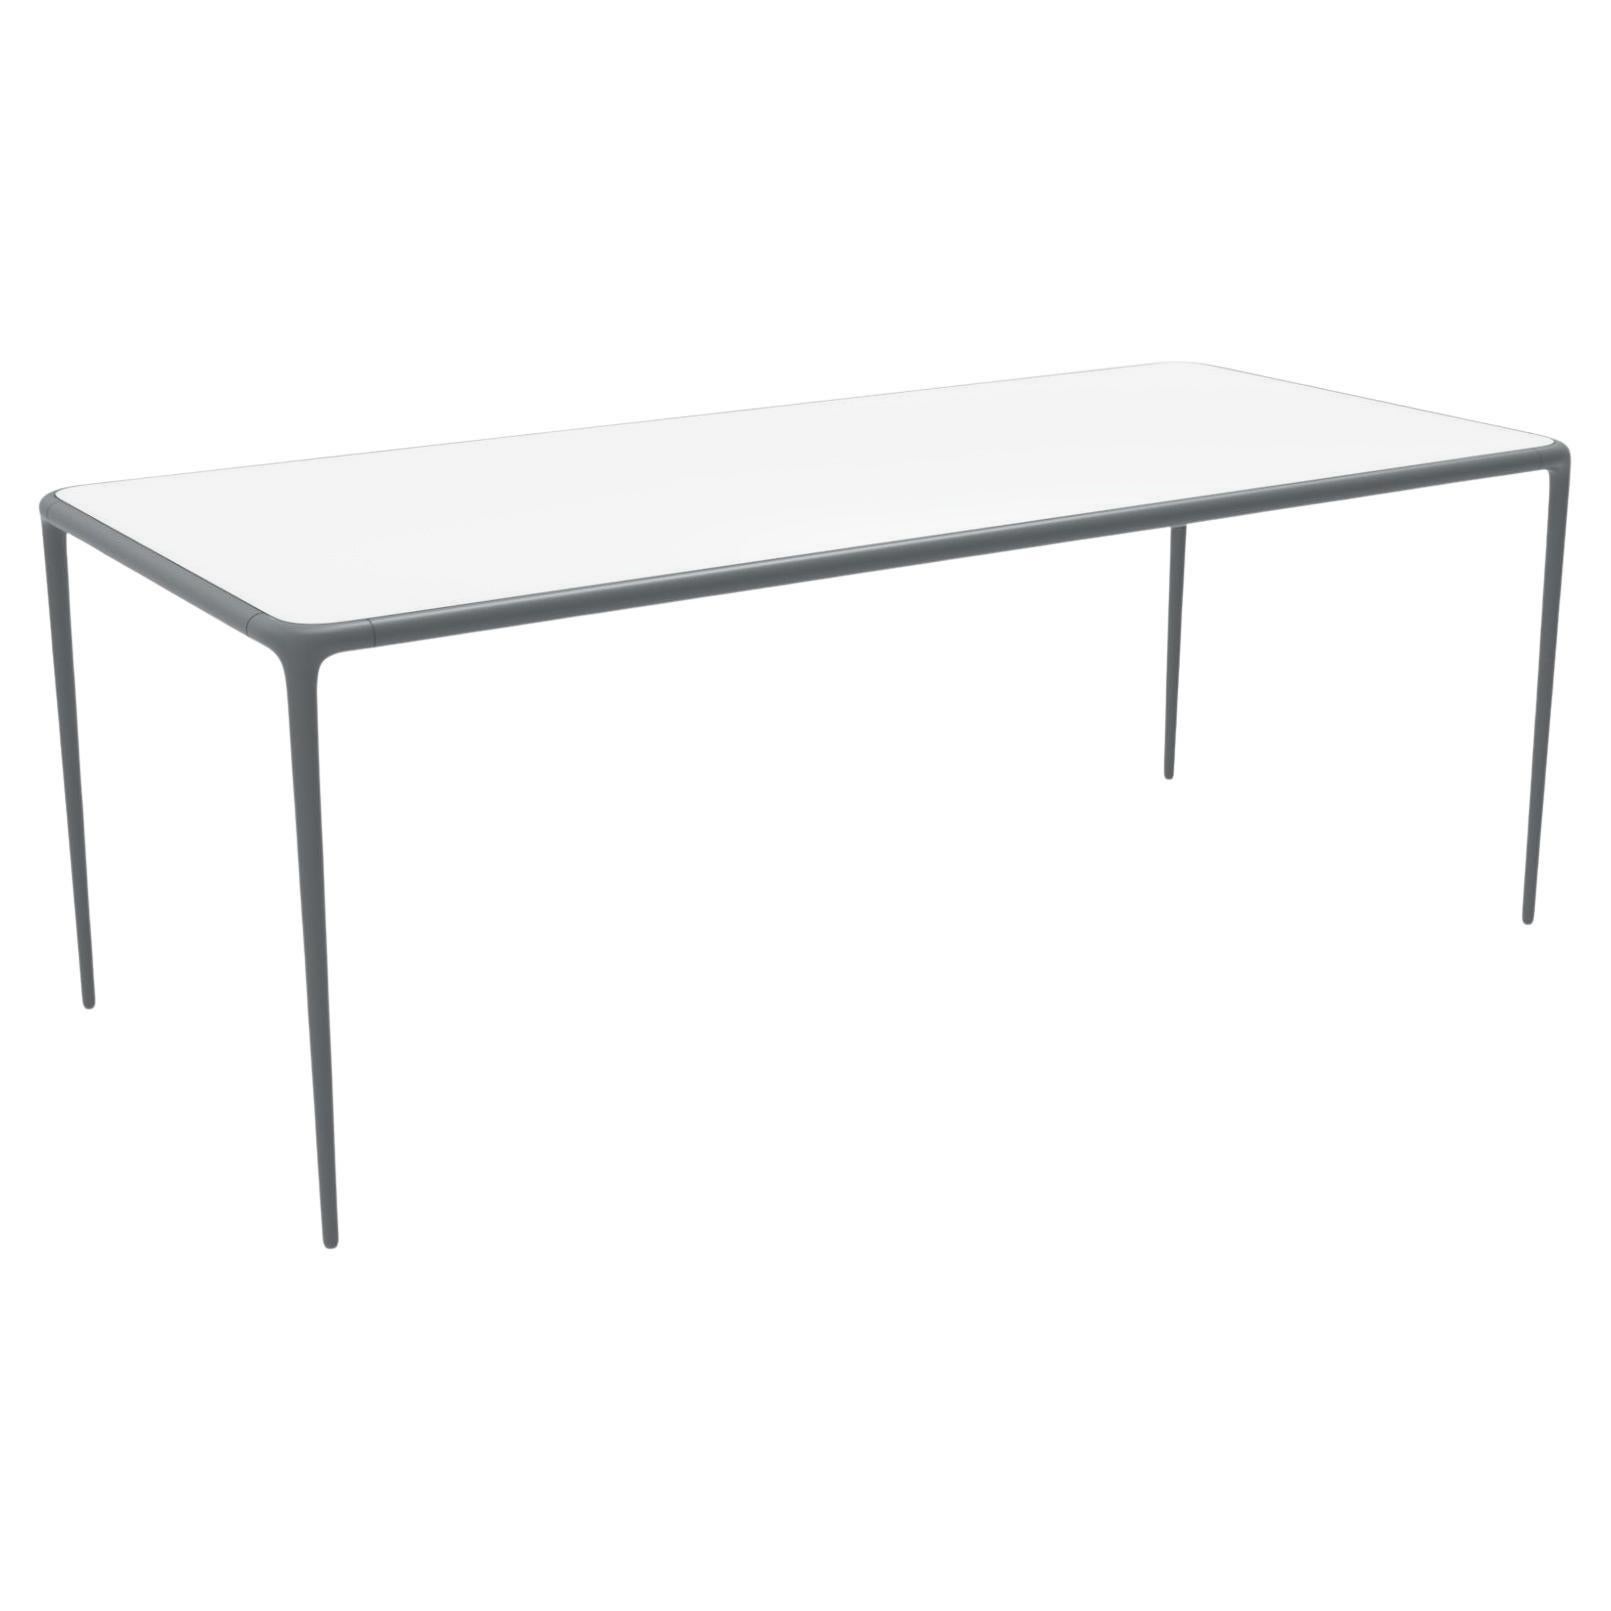 Xaloc Grey Glass Top Table 200 by Mowee For Sale